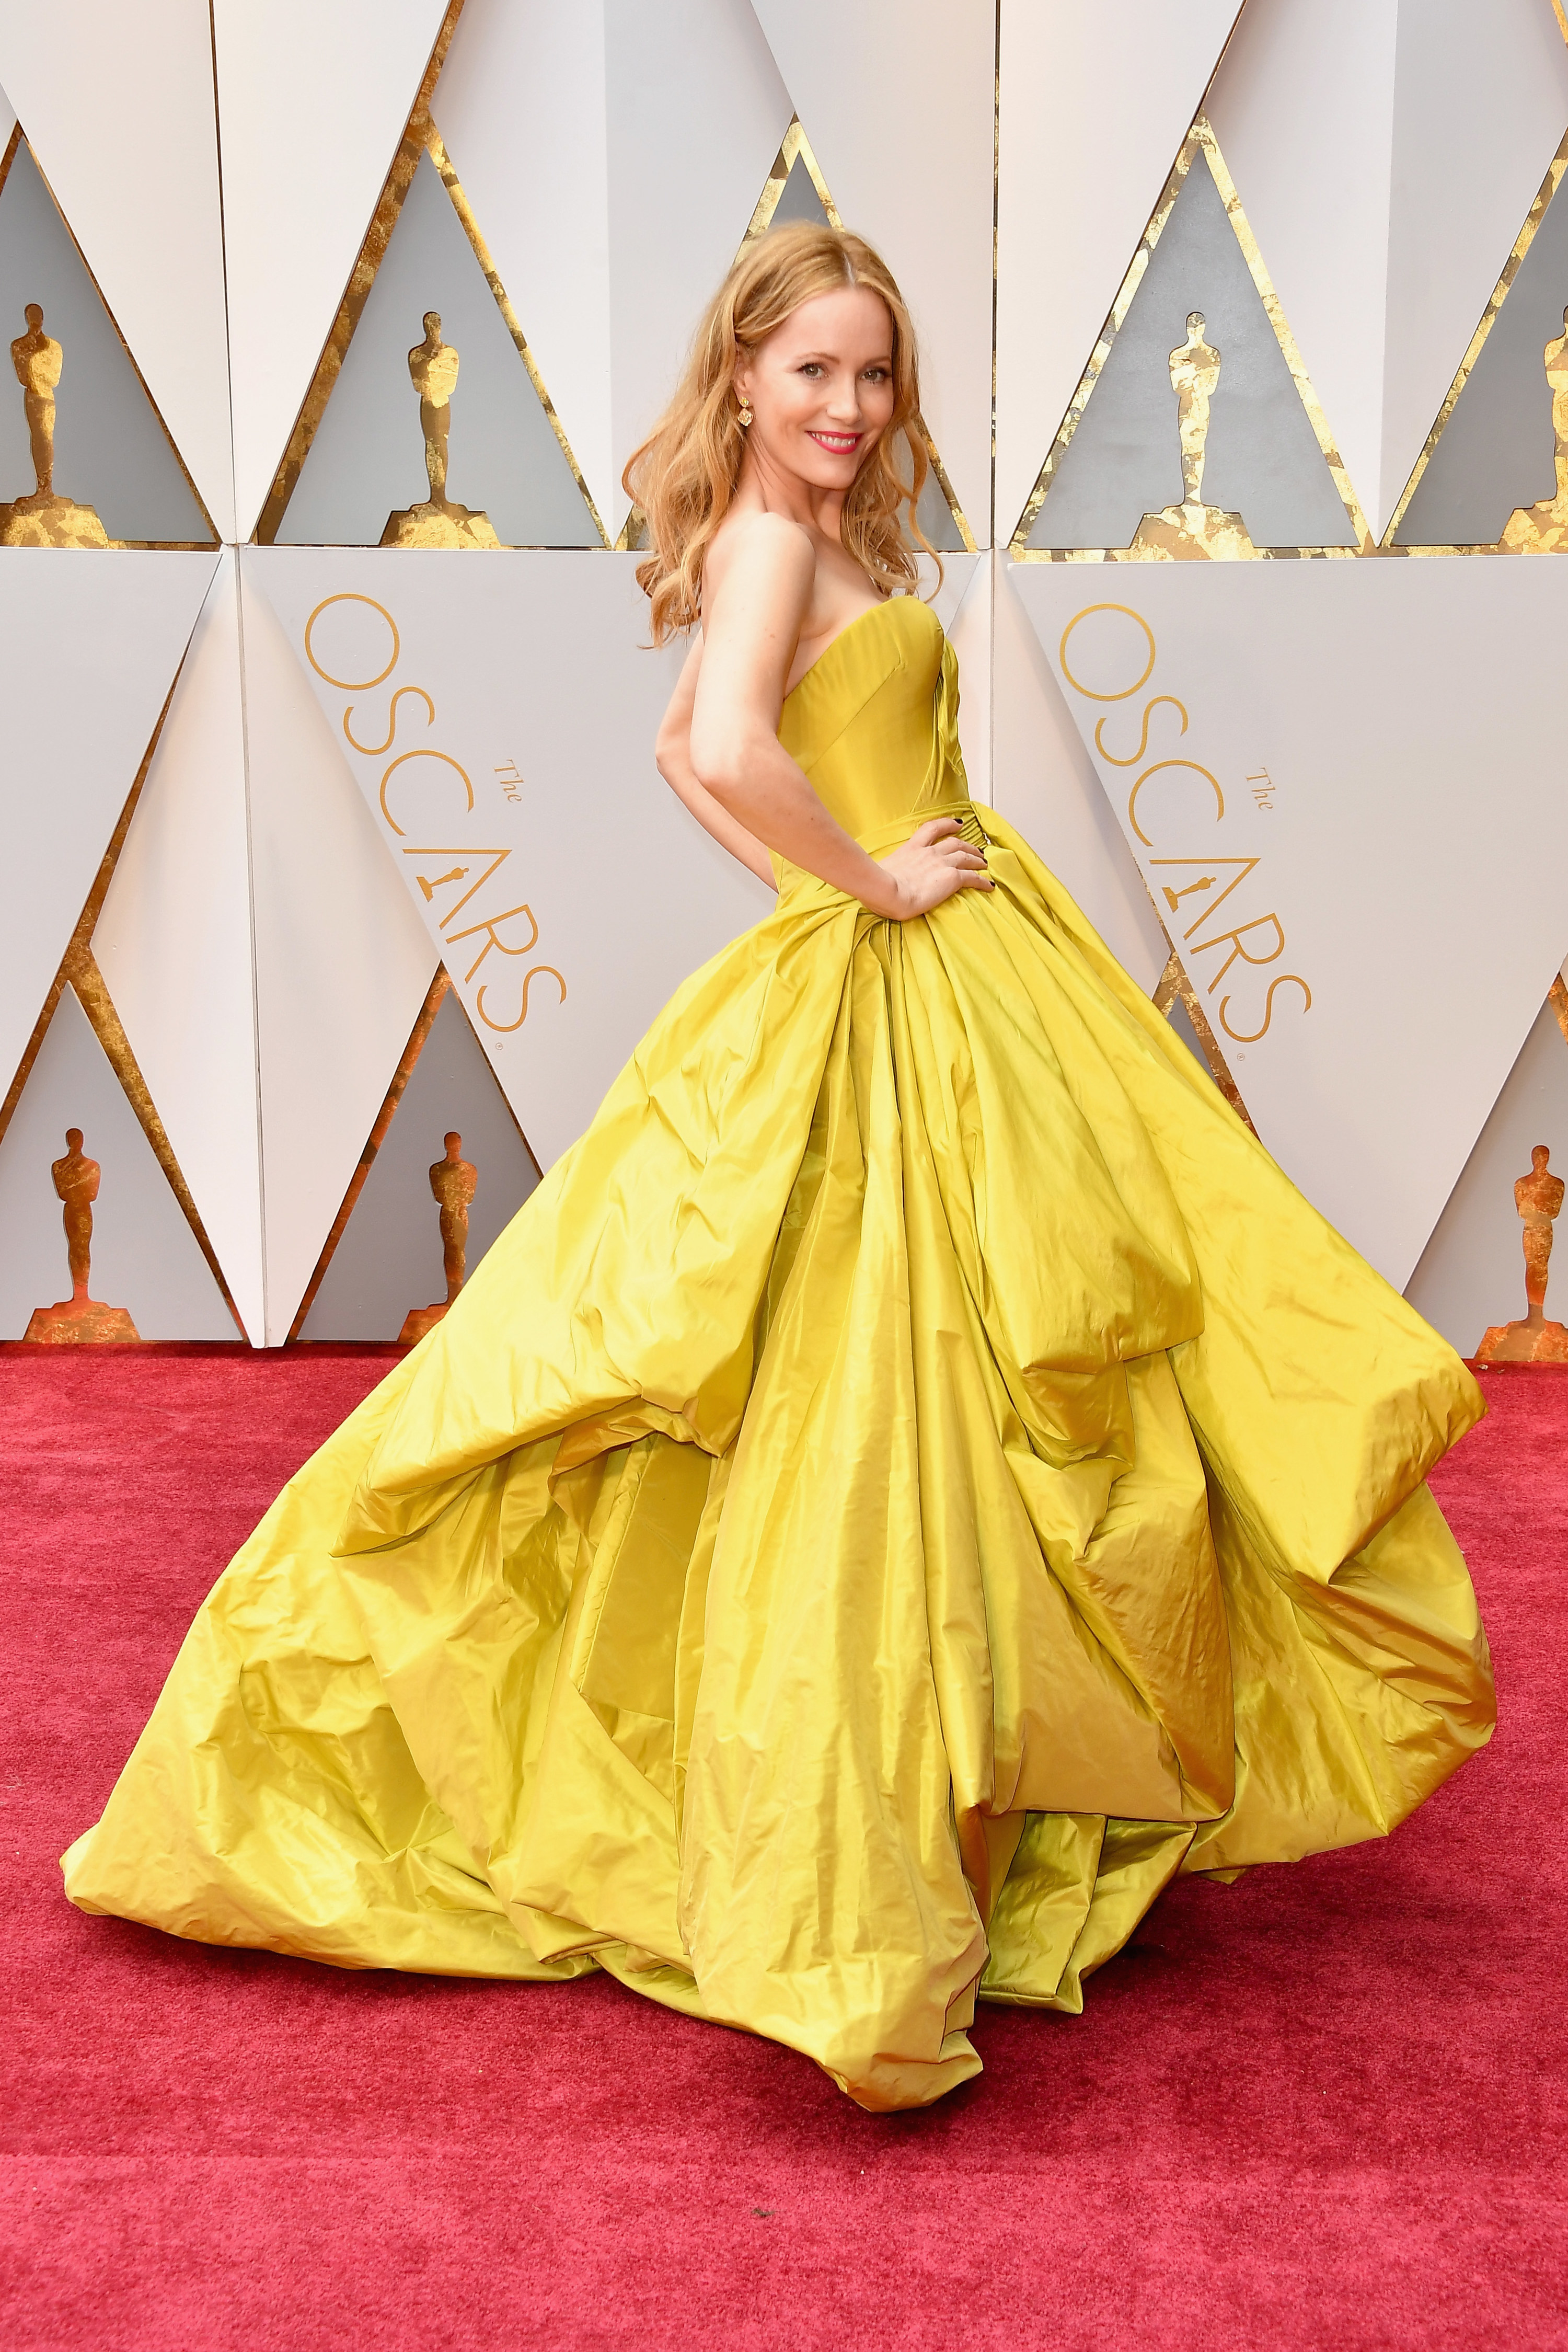 Leslie wearing a bright mustard-colored gown